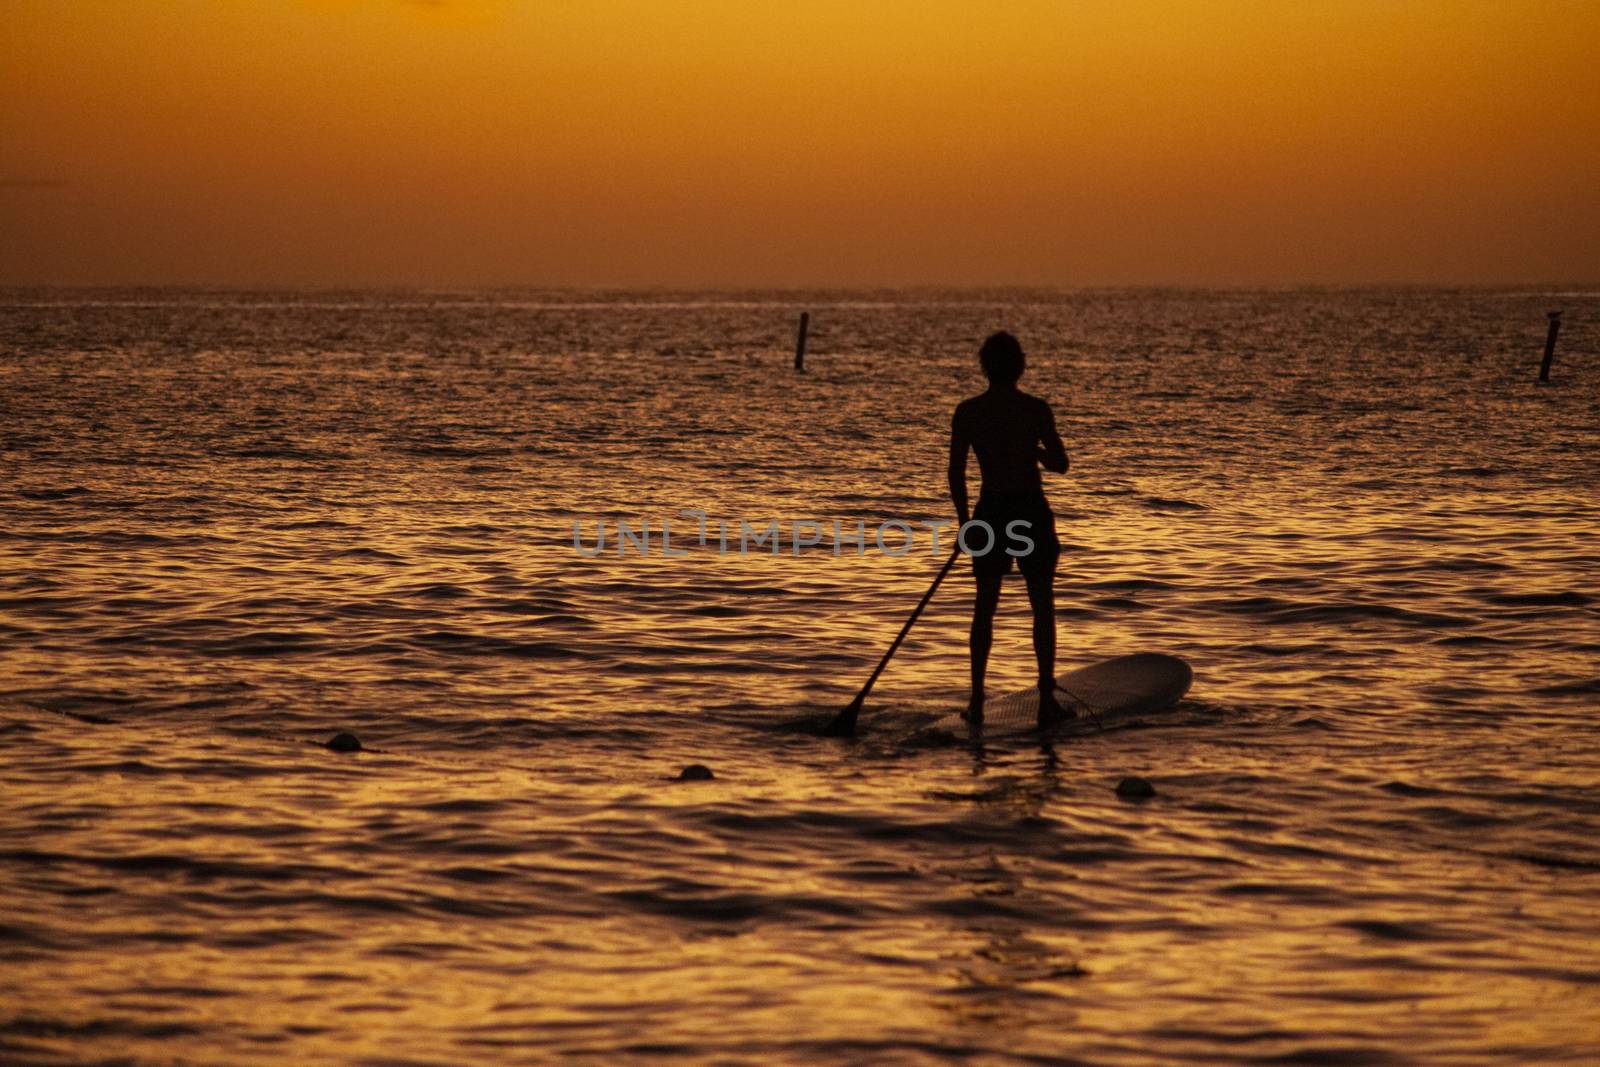 Rowing at the sea at sunset 6 by pippocarlot